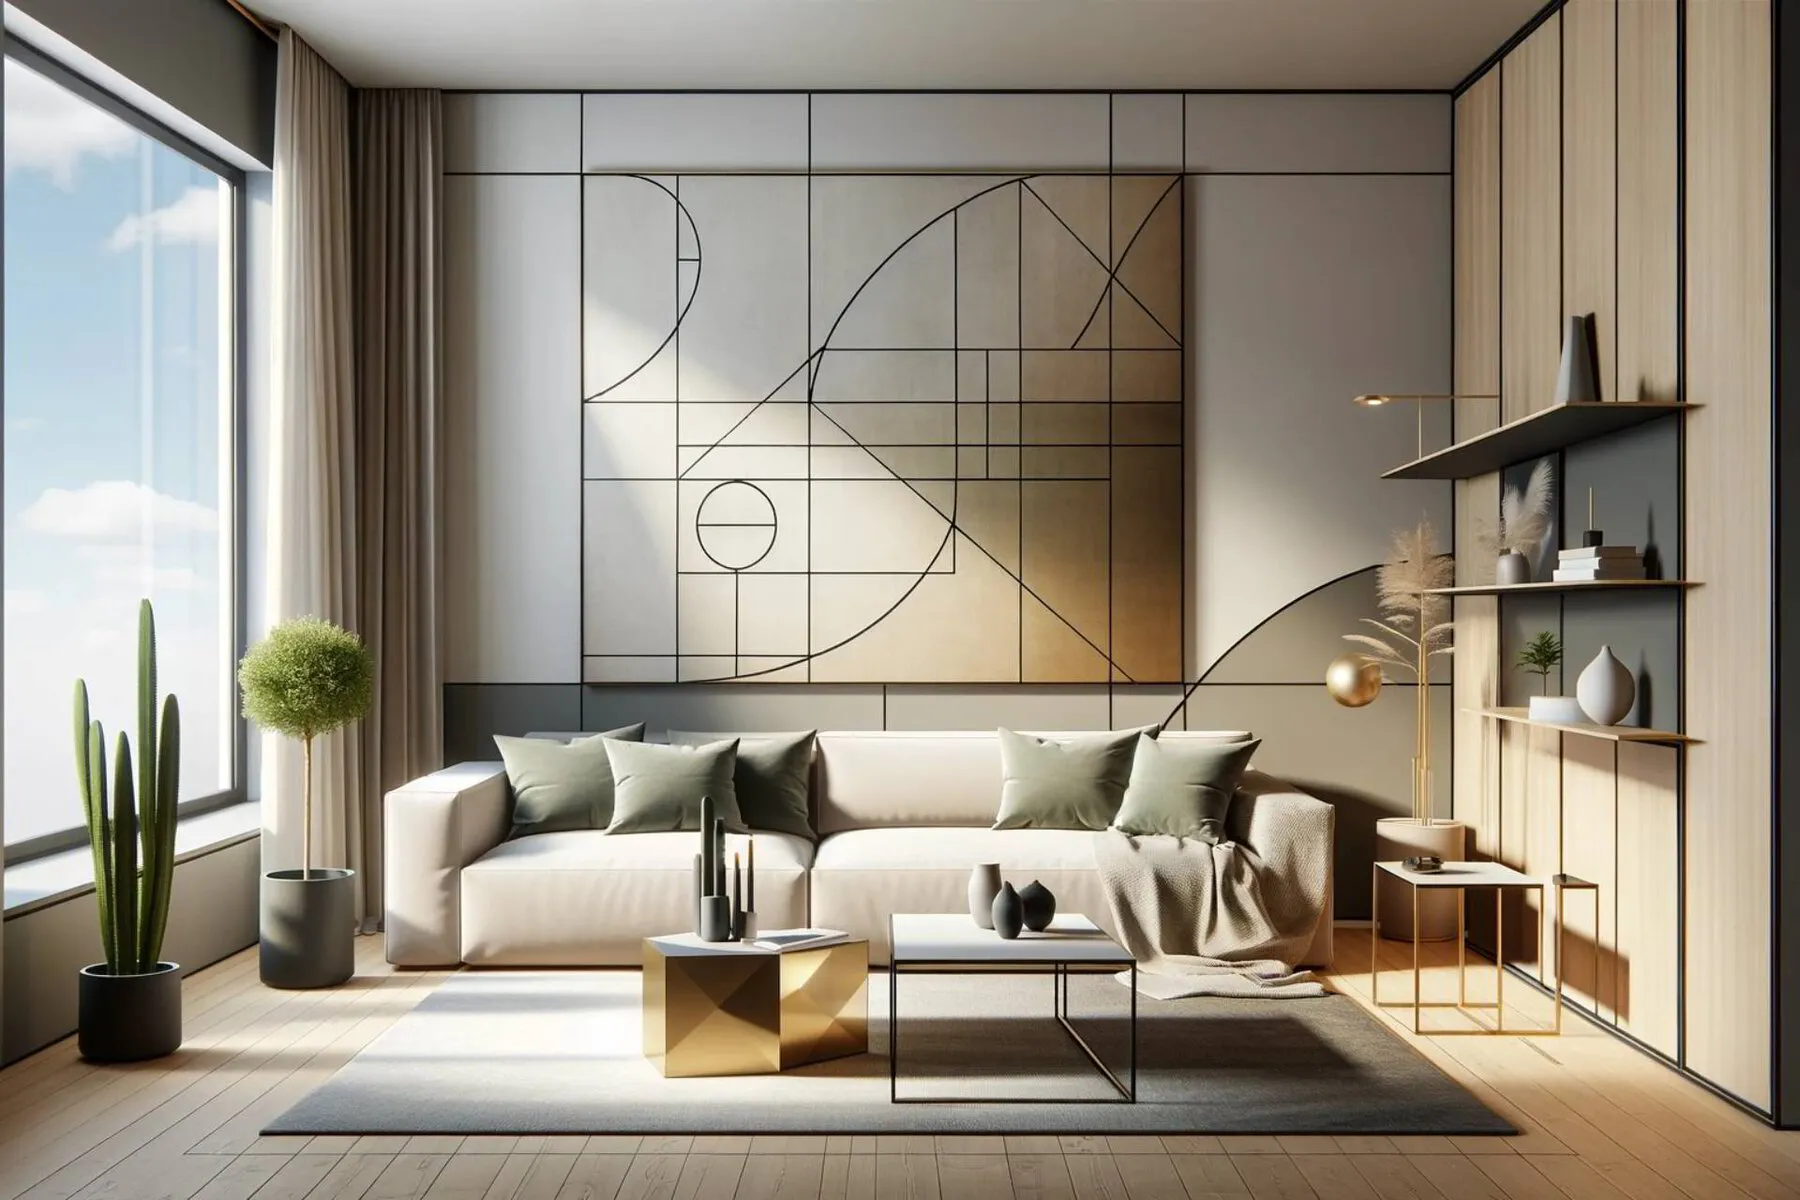 modern minimalist living room designed with the golden ratio principles